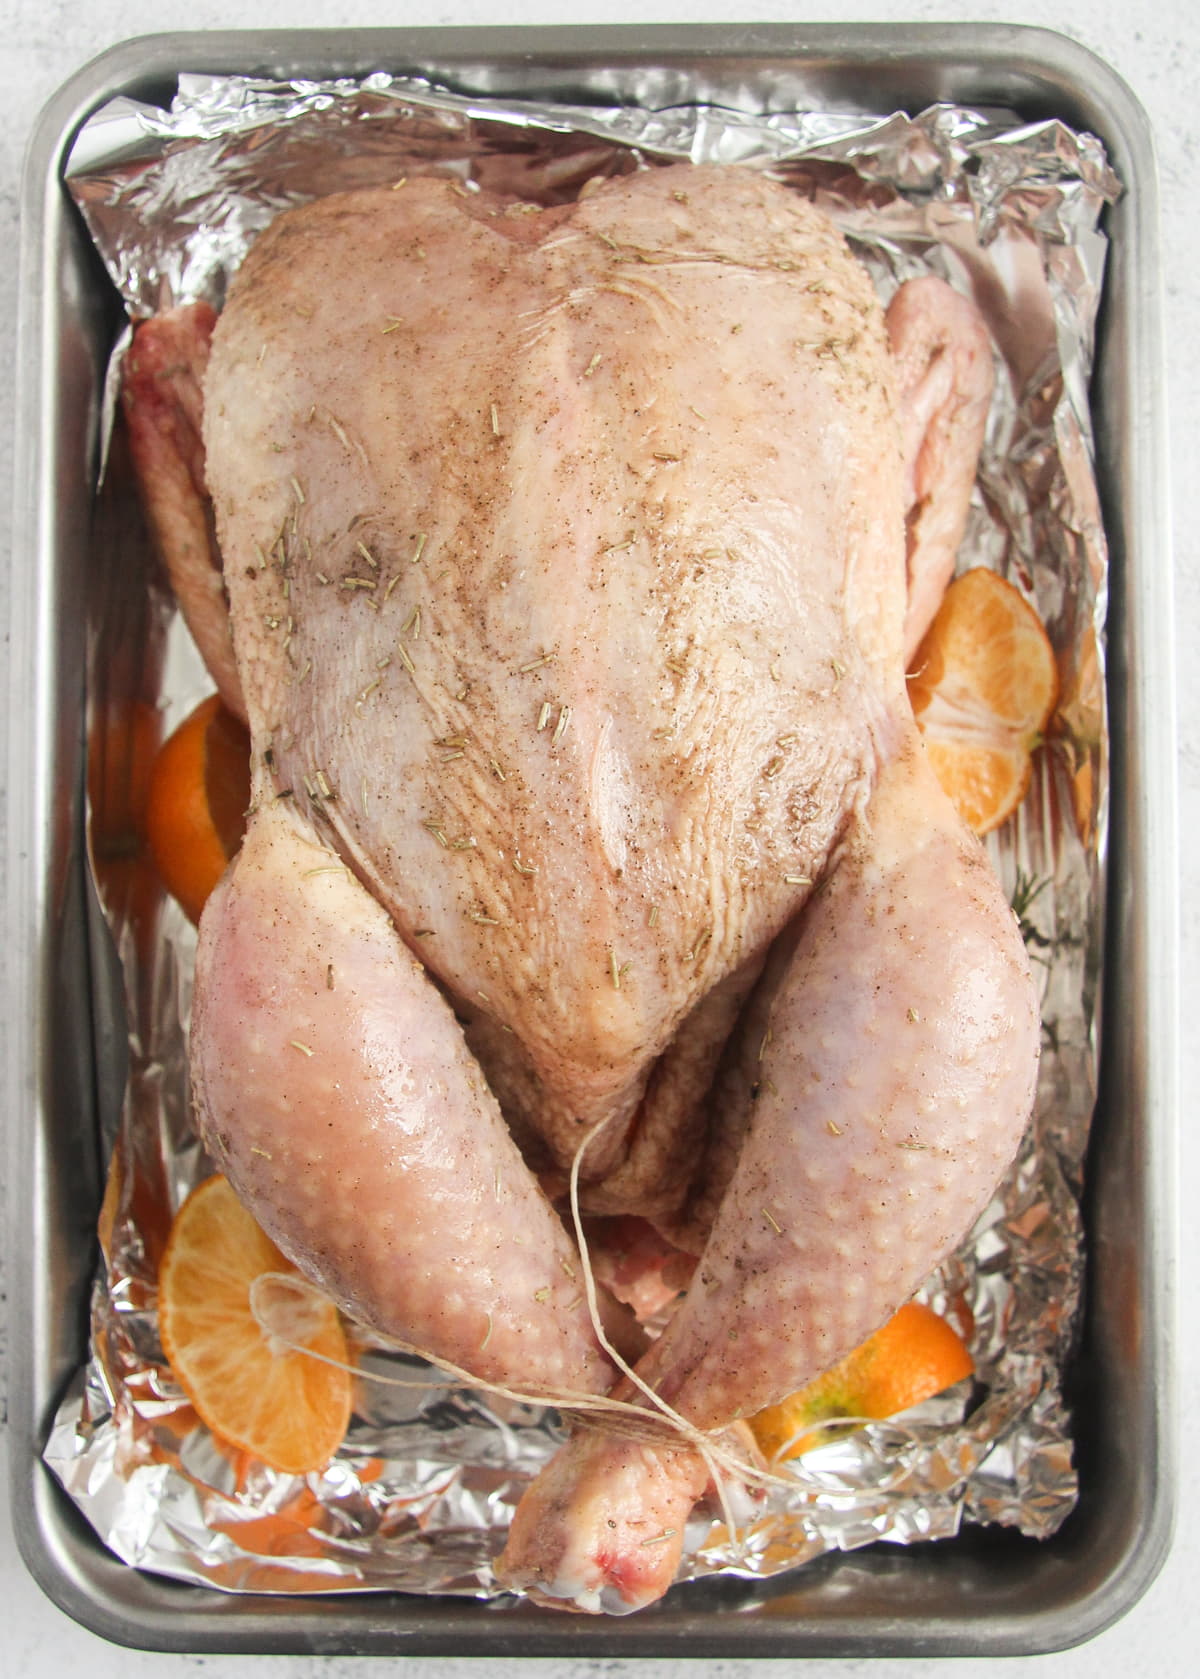 uncooked whole chicken in a roasting tin.